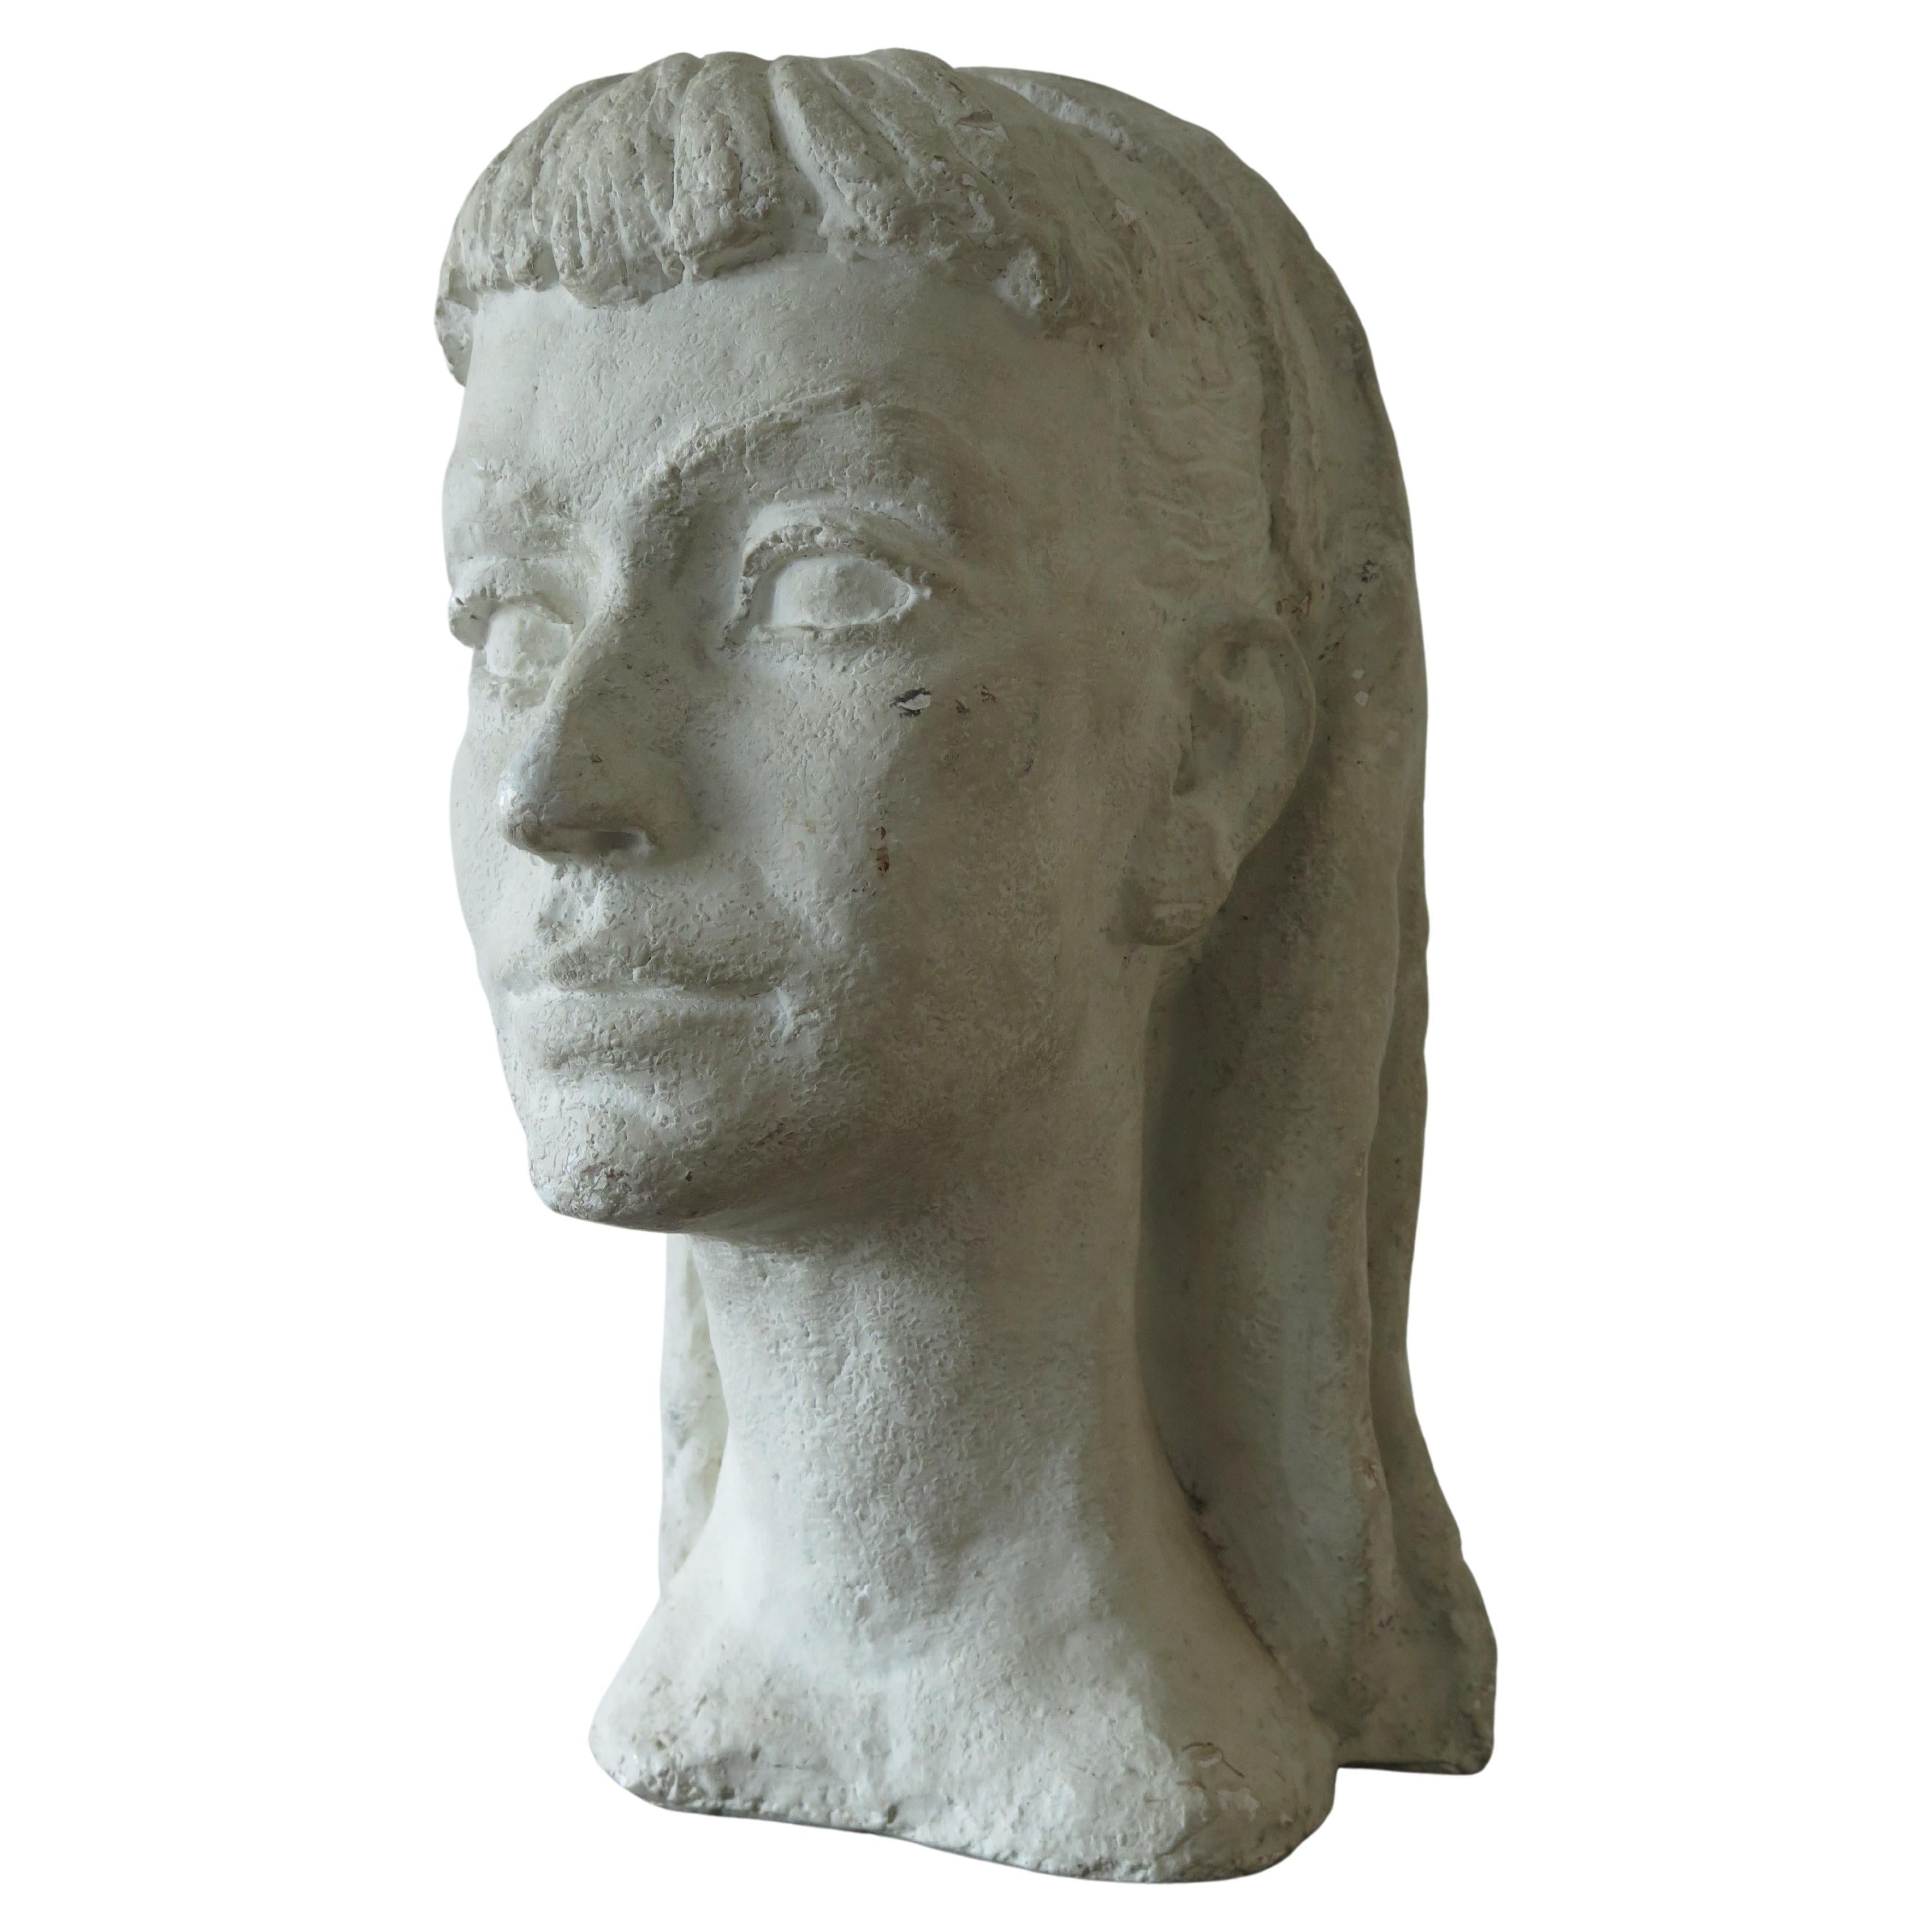 A beautiful, stylized bust by Anne Van Kleeck, circa 1950s. Plaster, heavy, this unique sculpture has a real mid-century feel and timeless presence. From the artist's estate. 
A note about the artist: Anne Van Kleeck was primarily known for her